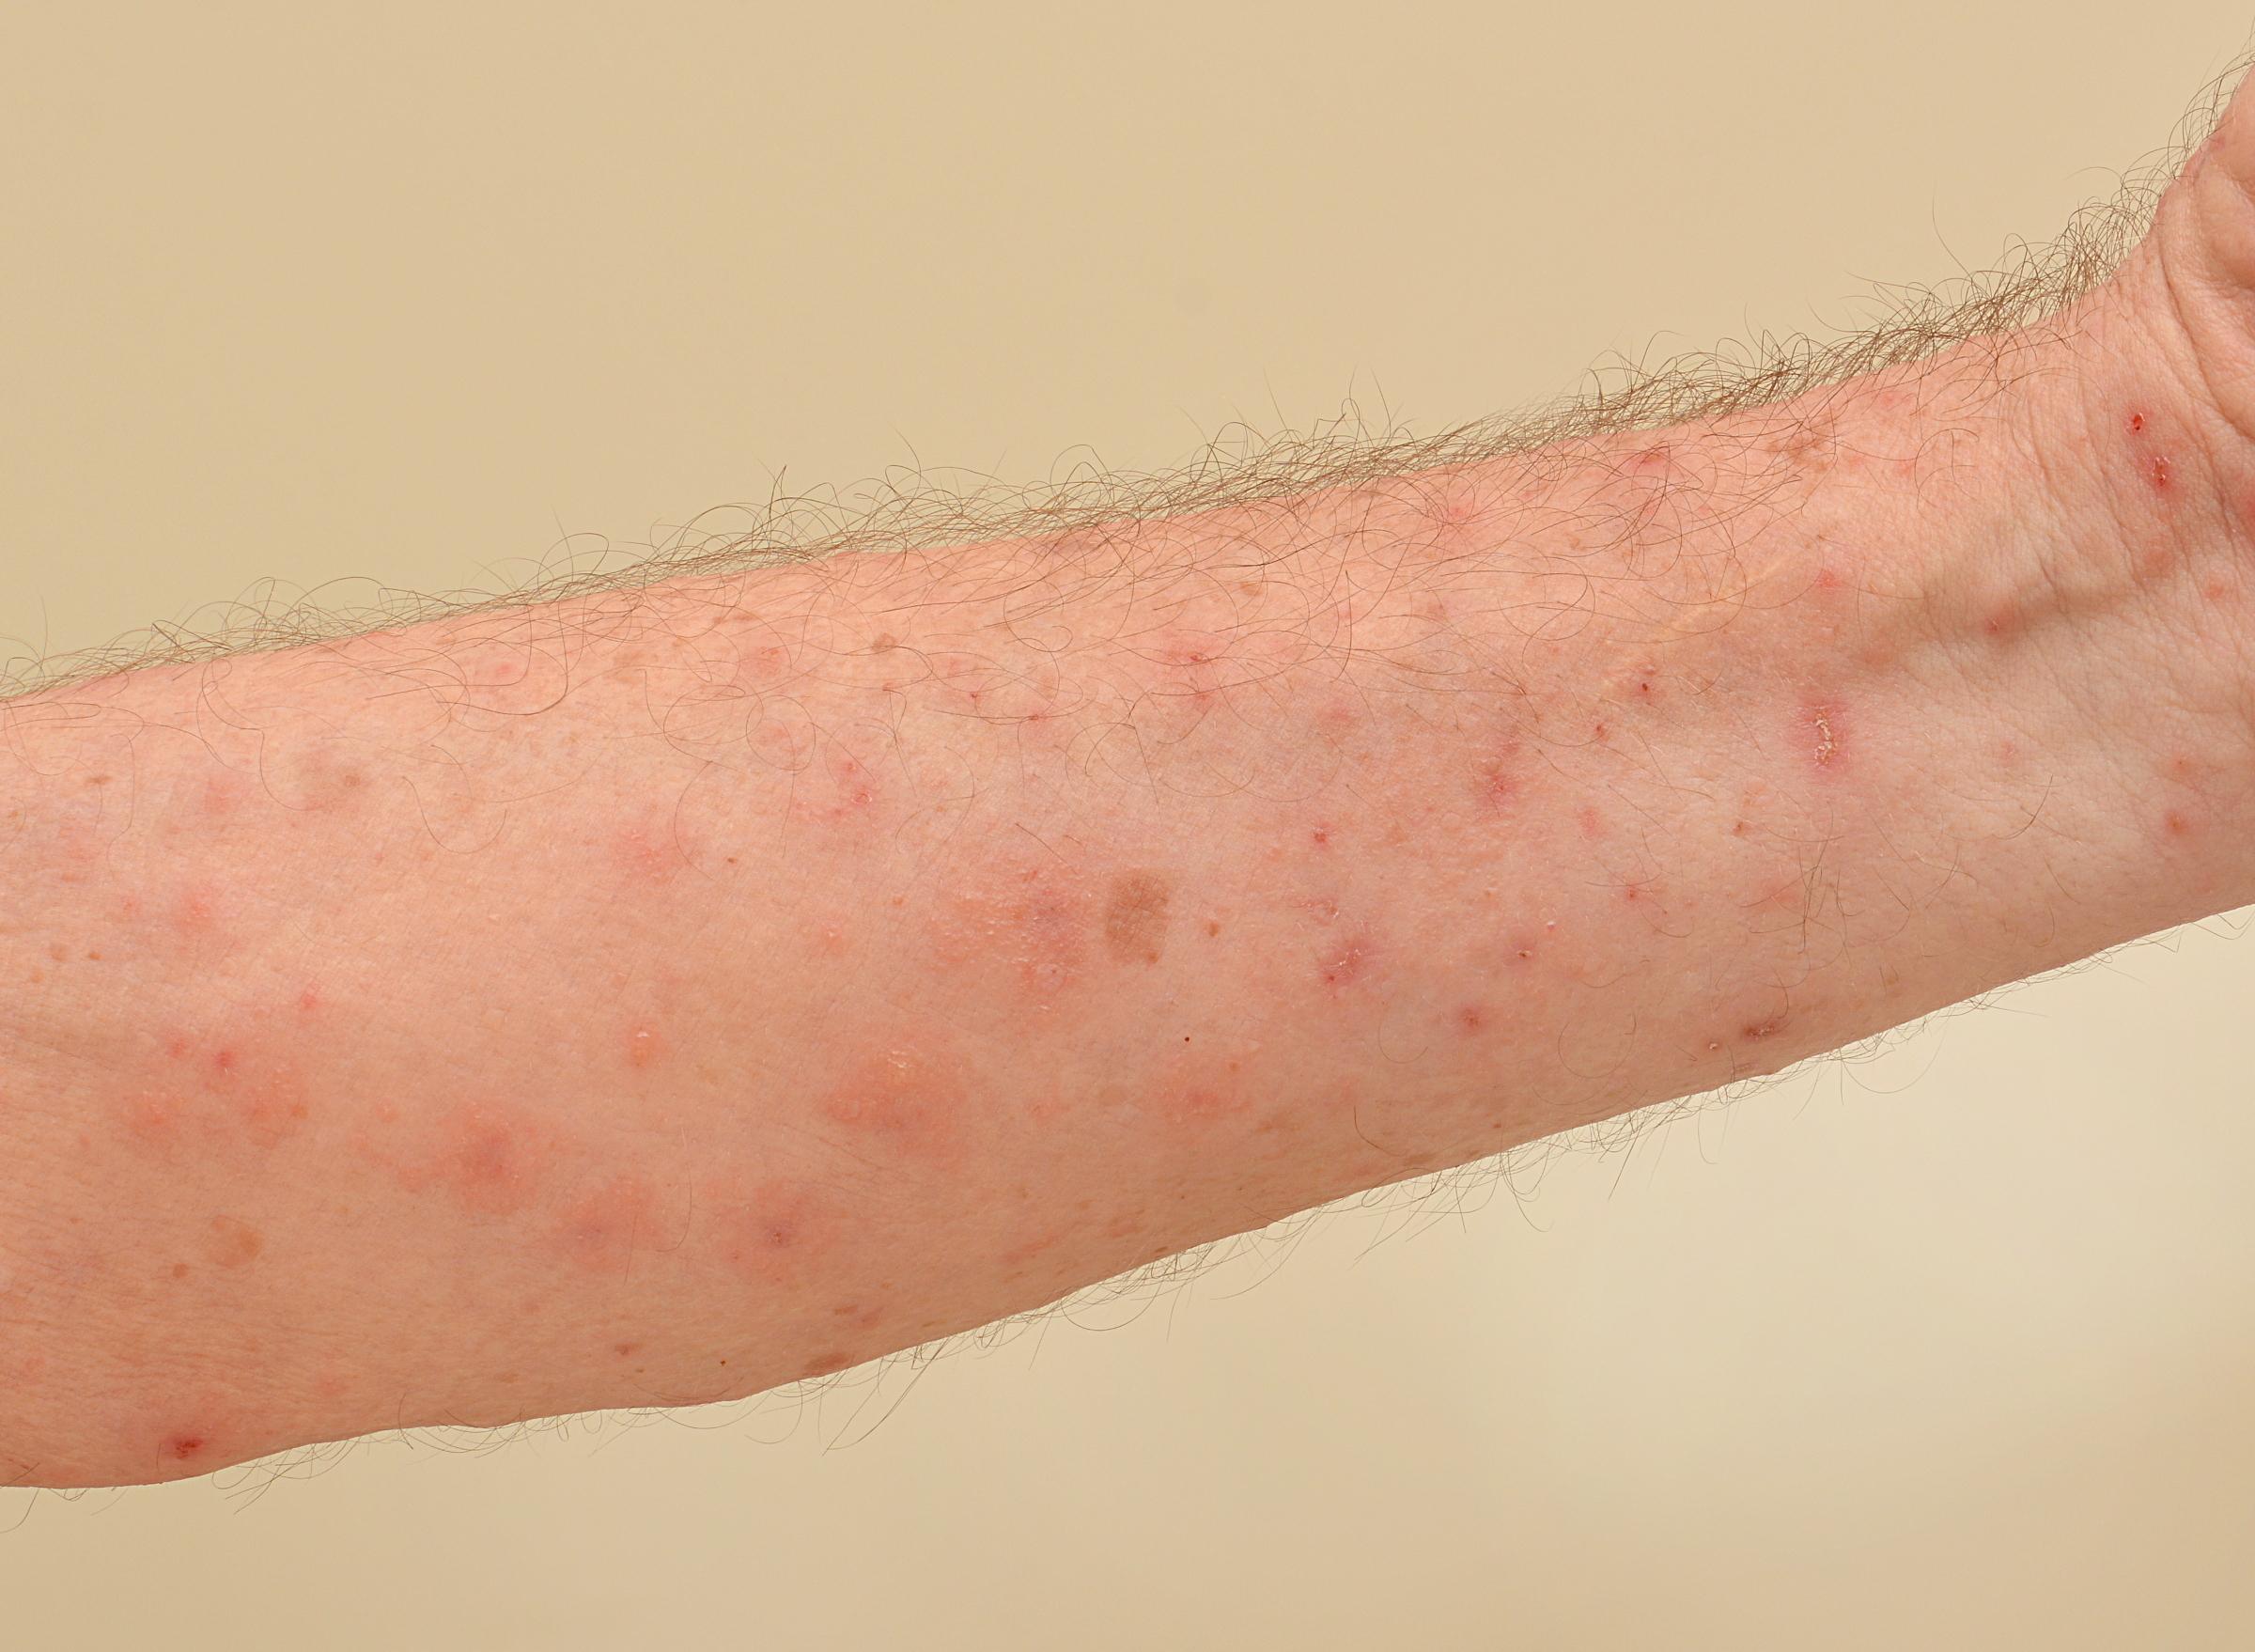 What causes scabies in nursing homes?